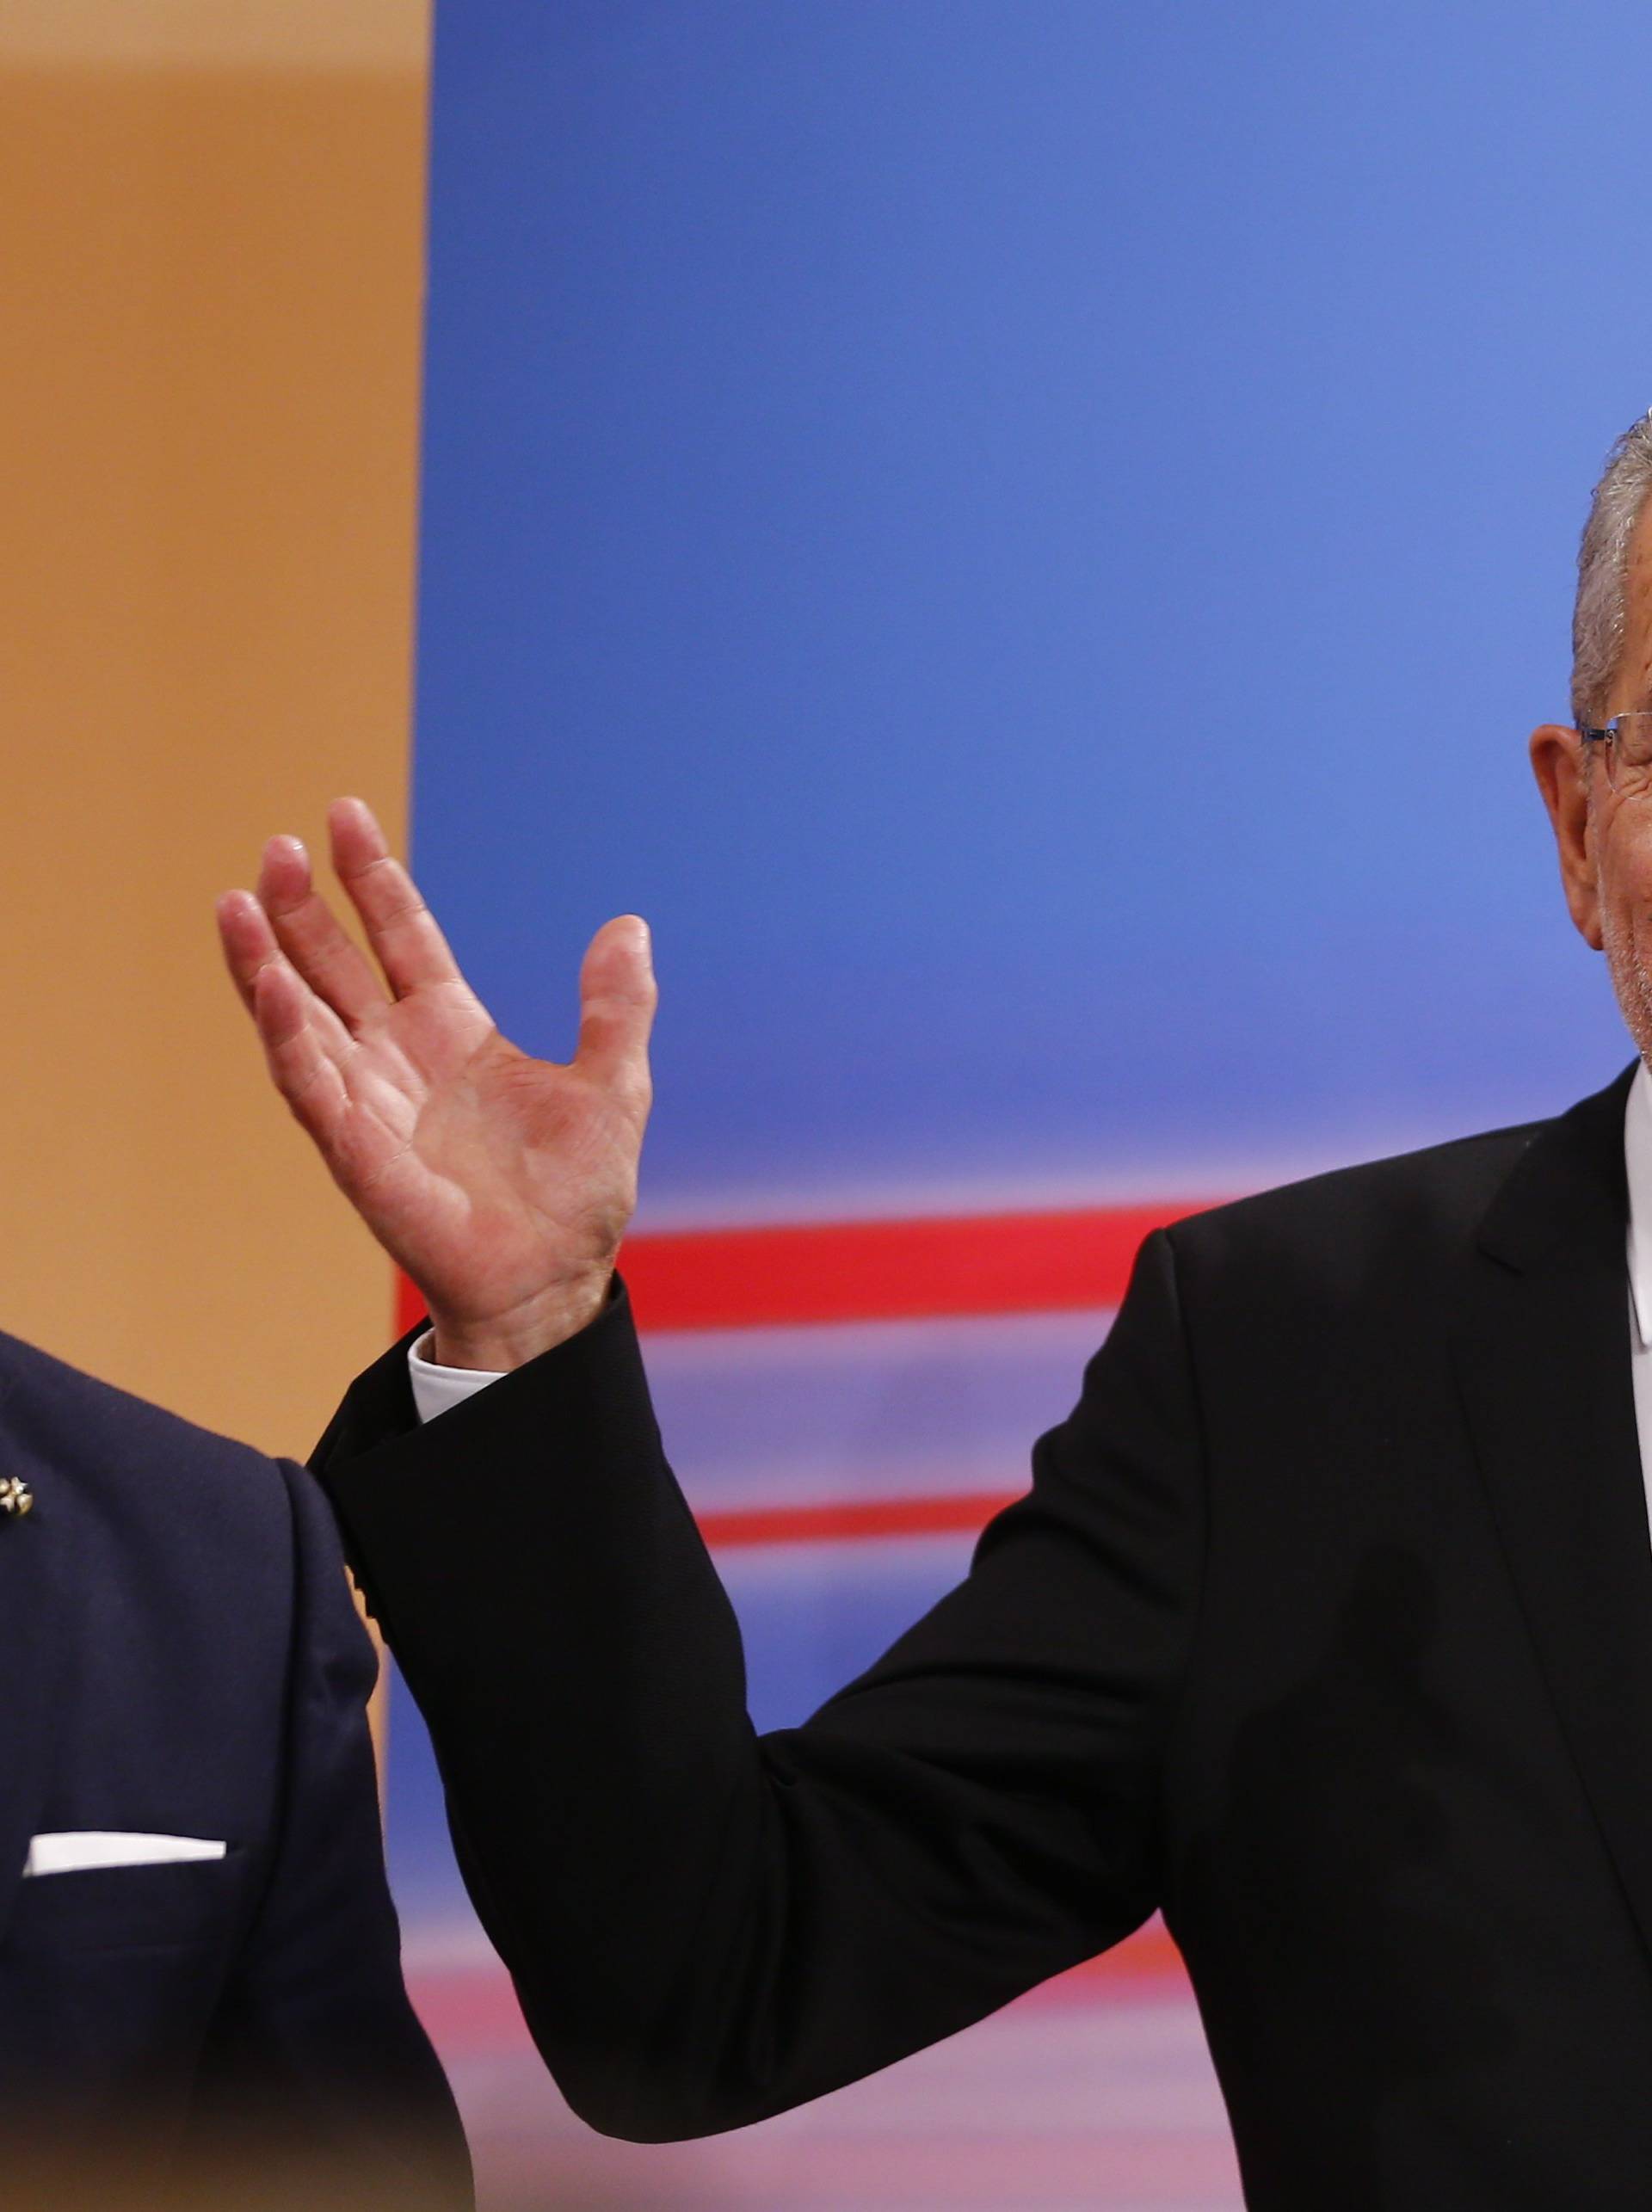 Austrian presidential candidate Van der Bellen, who is supported by the Greens, and reacts during a TV show in Vienna